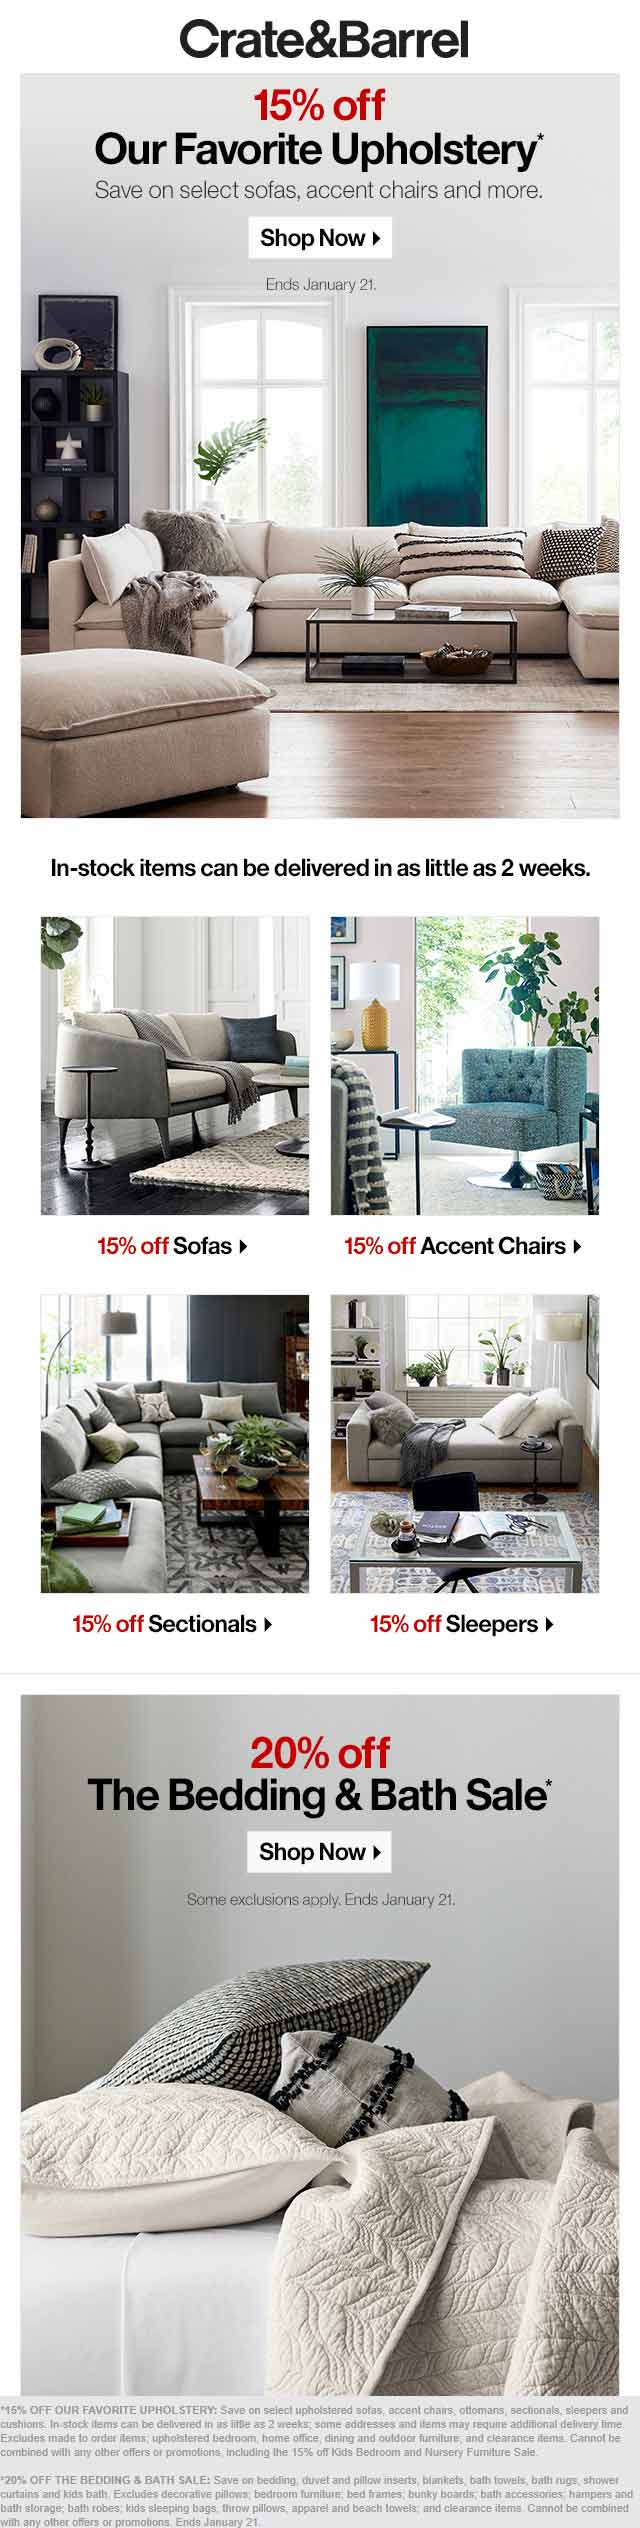 Crate & Barrel coupons & promo code for [May 2022]